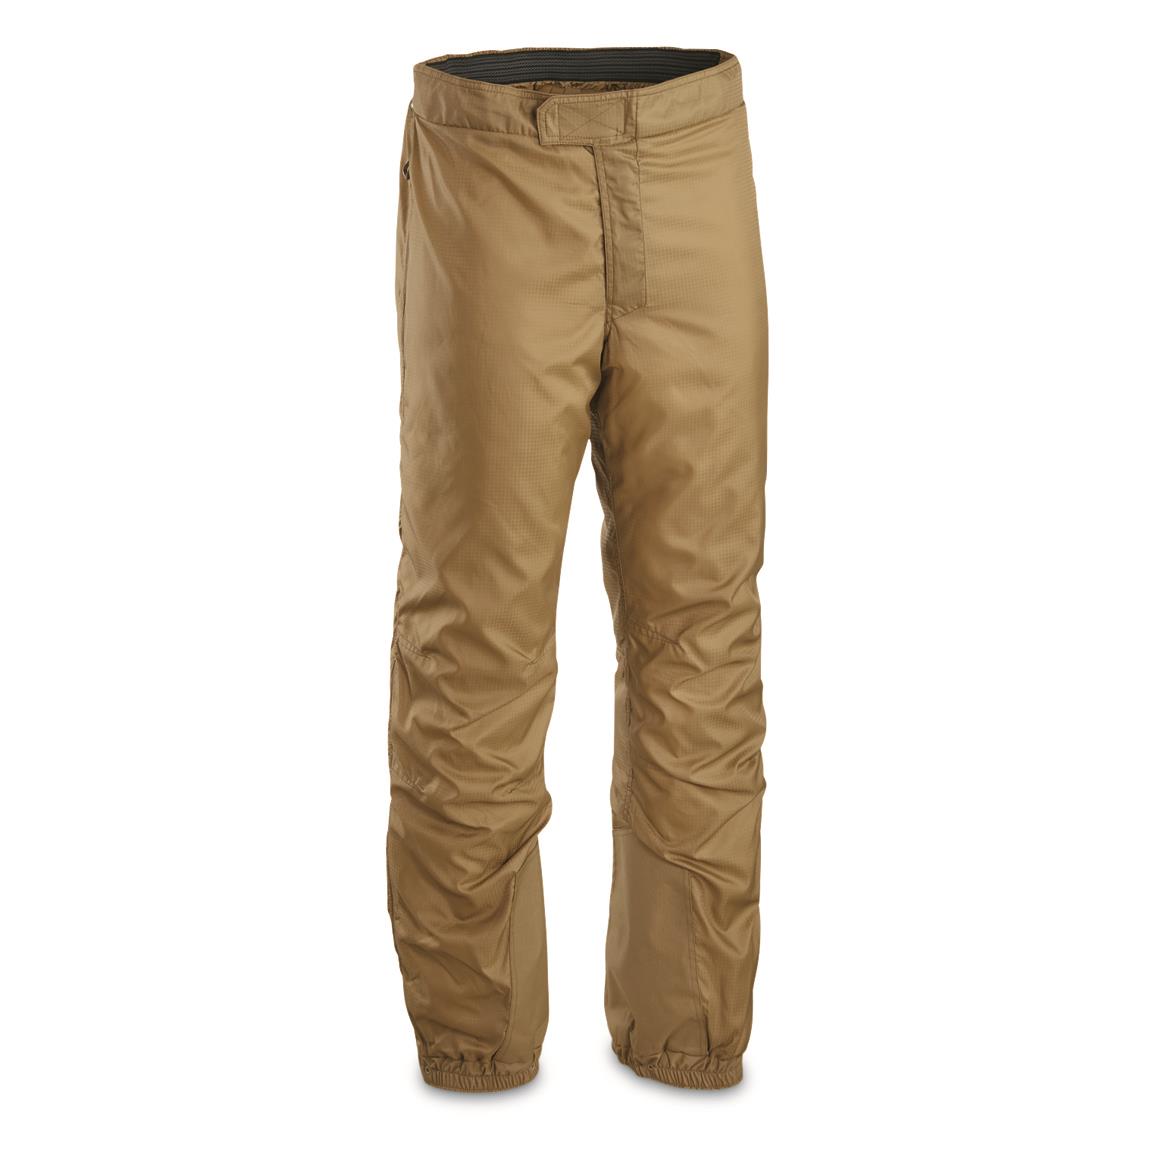 Beyond A7 Cold Weather High Loft Pants, Coyote